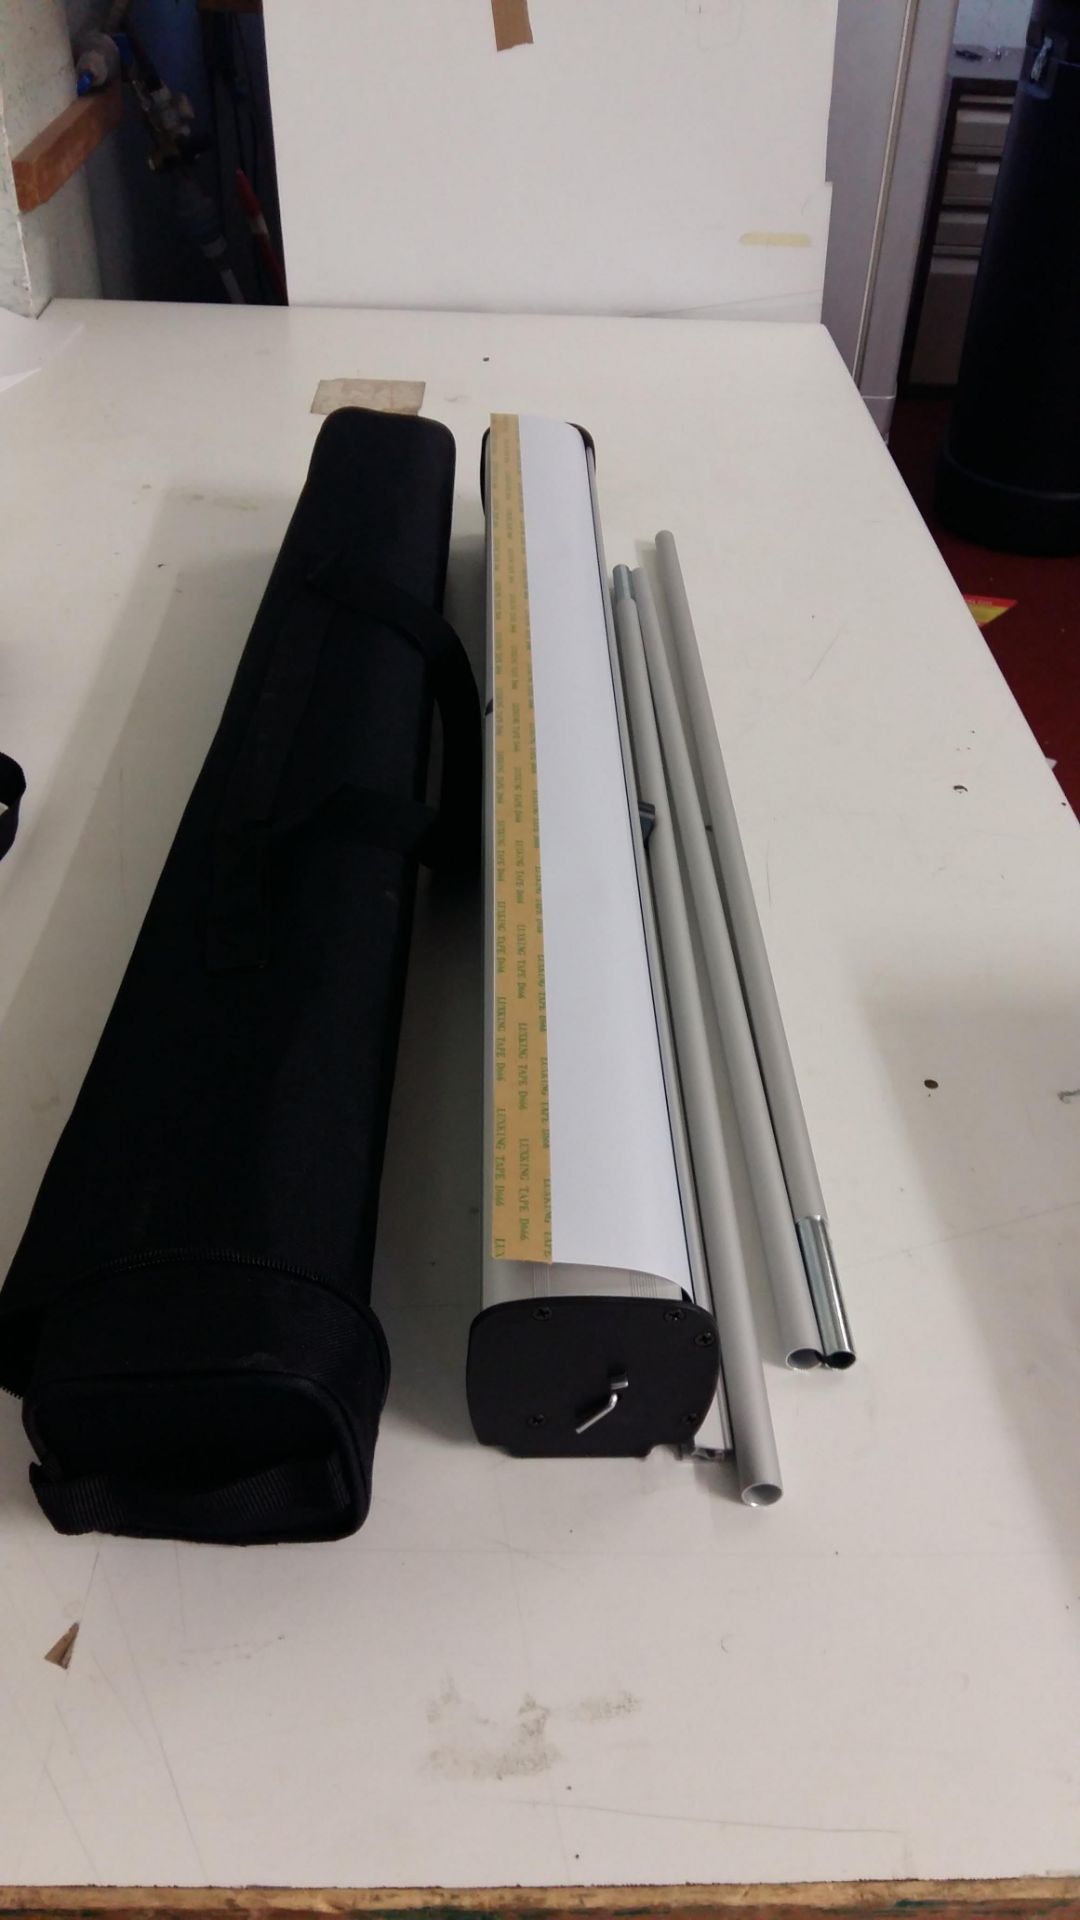 (6) 800mm Expand Media Roll Up Banners - Brand New in Box - Image 3 of 5